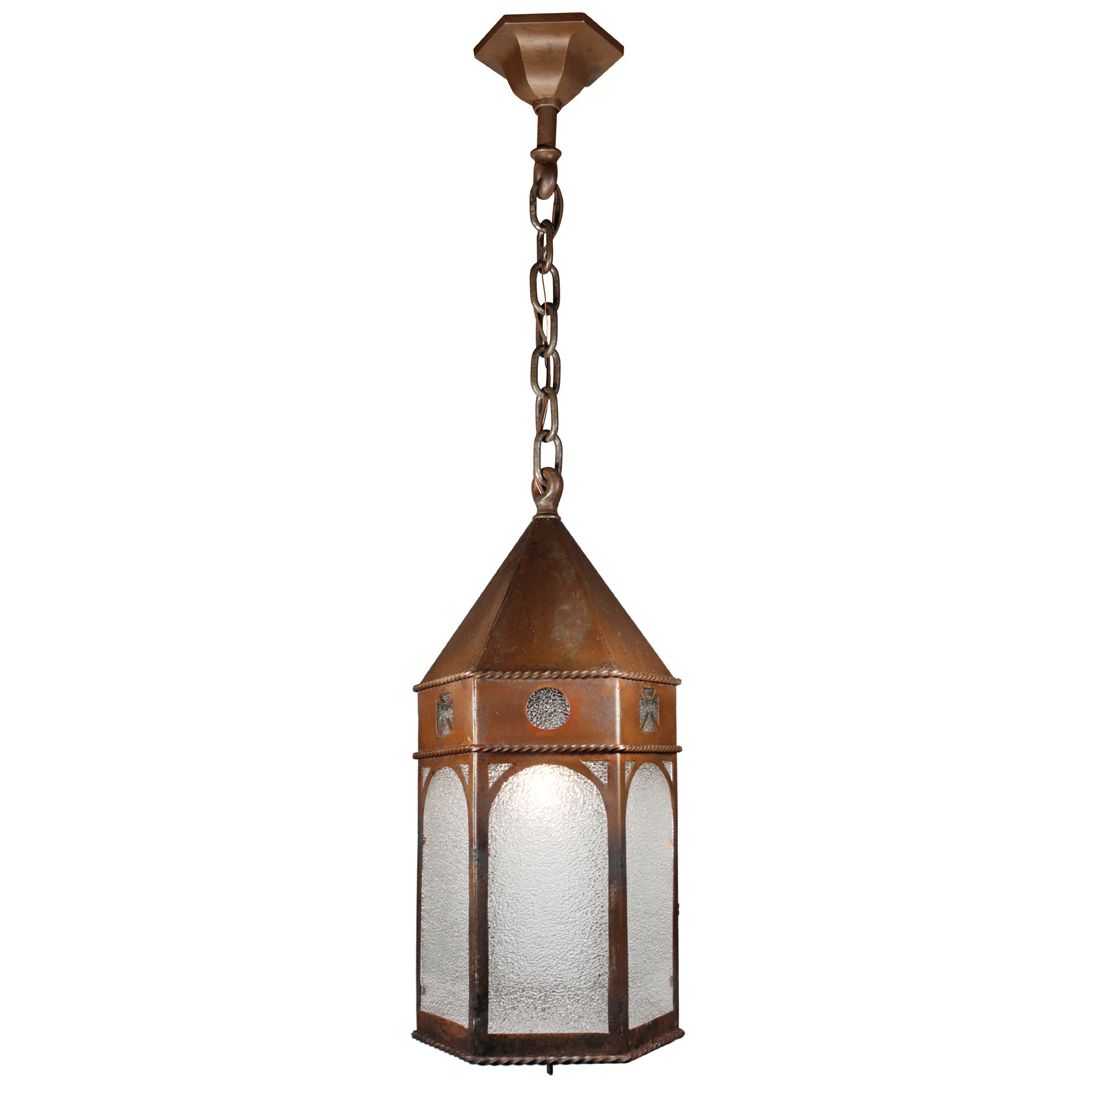 Bronze Lantern Chandeliers Pertaining To Trendy Matching Antique Bronze Lantern Pendant Lights With Granite Glass – Antique  Lighting, Ceiling, Ceiling Mounted, Exterior, Lanterns, Lighting,  Pair/multiple Chandeliers, Pendant Lighting, Recent Arrivals – The  Preservation Station (View 6 of 15)